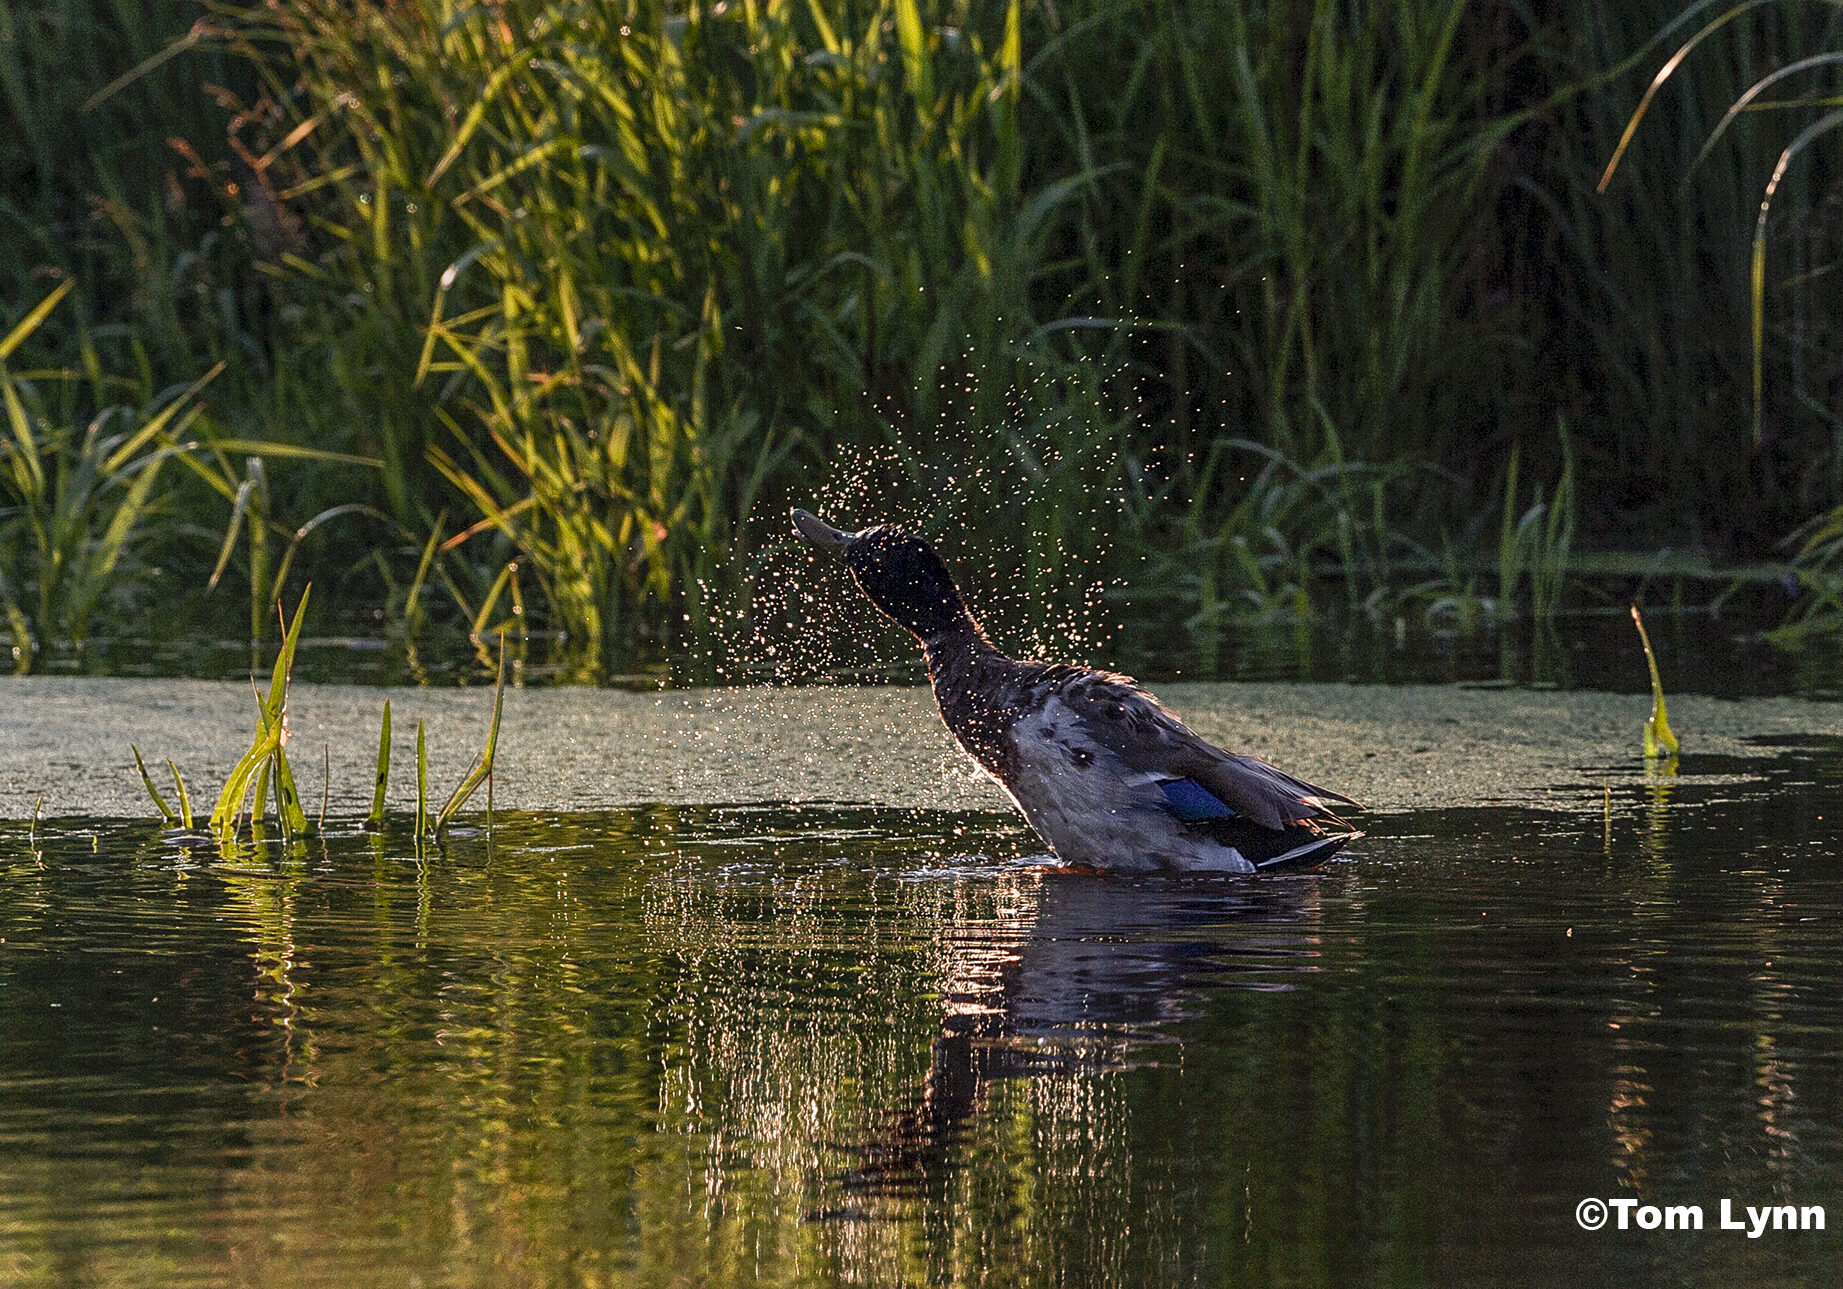 A duck shakes its head to dry off during golden hour